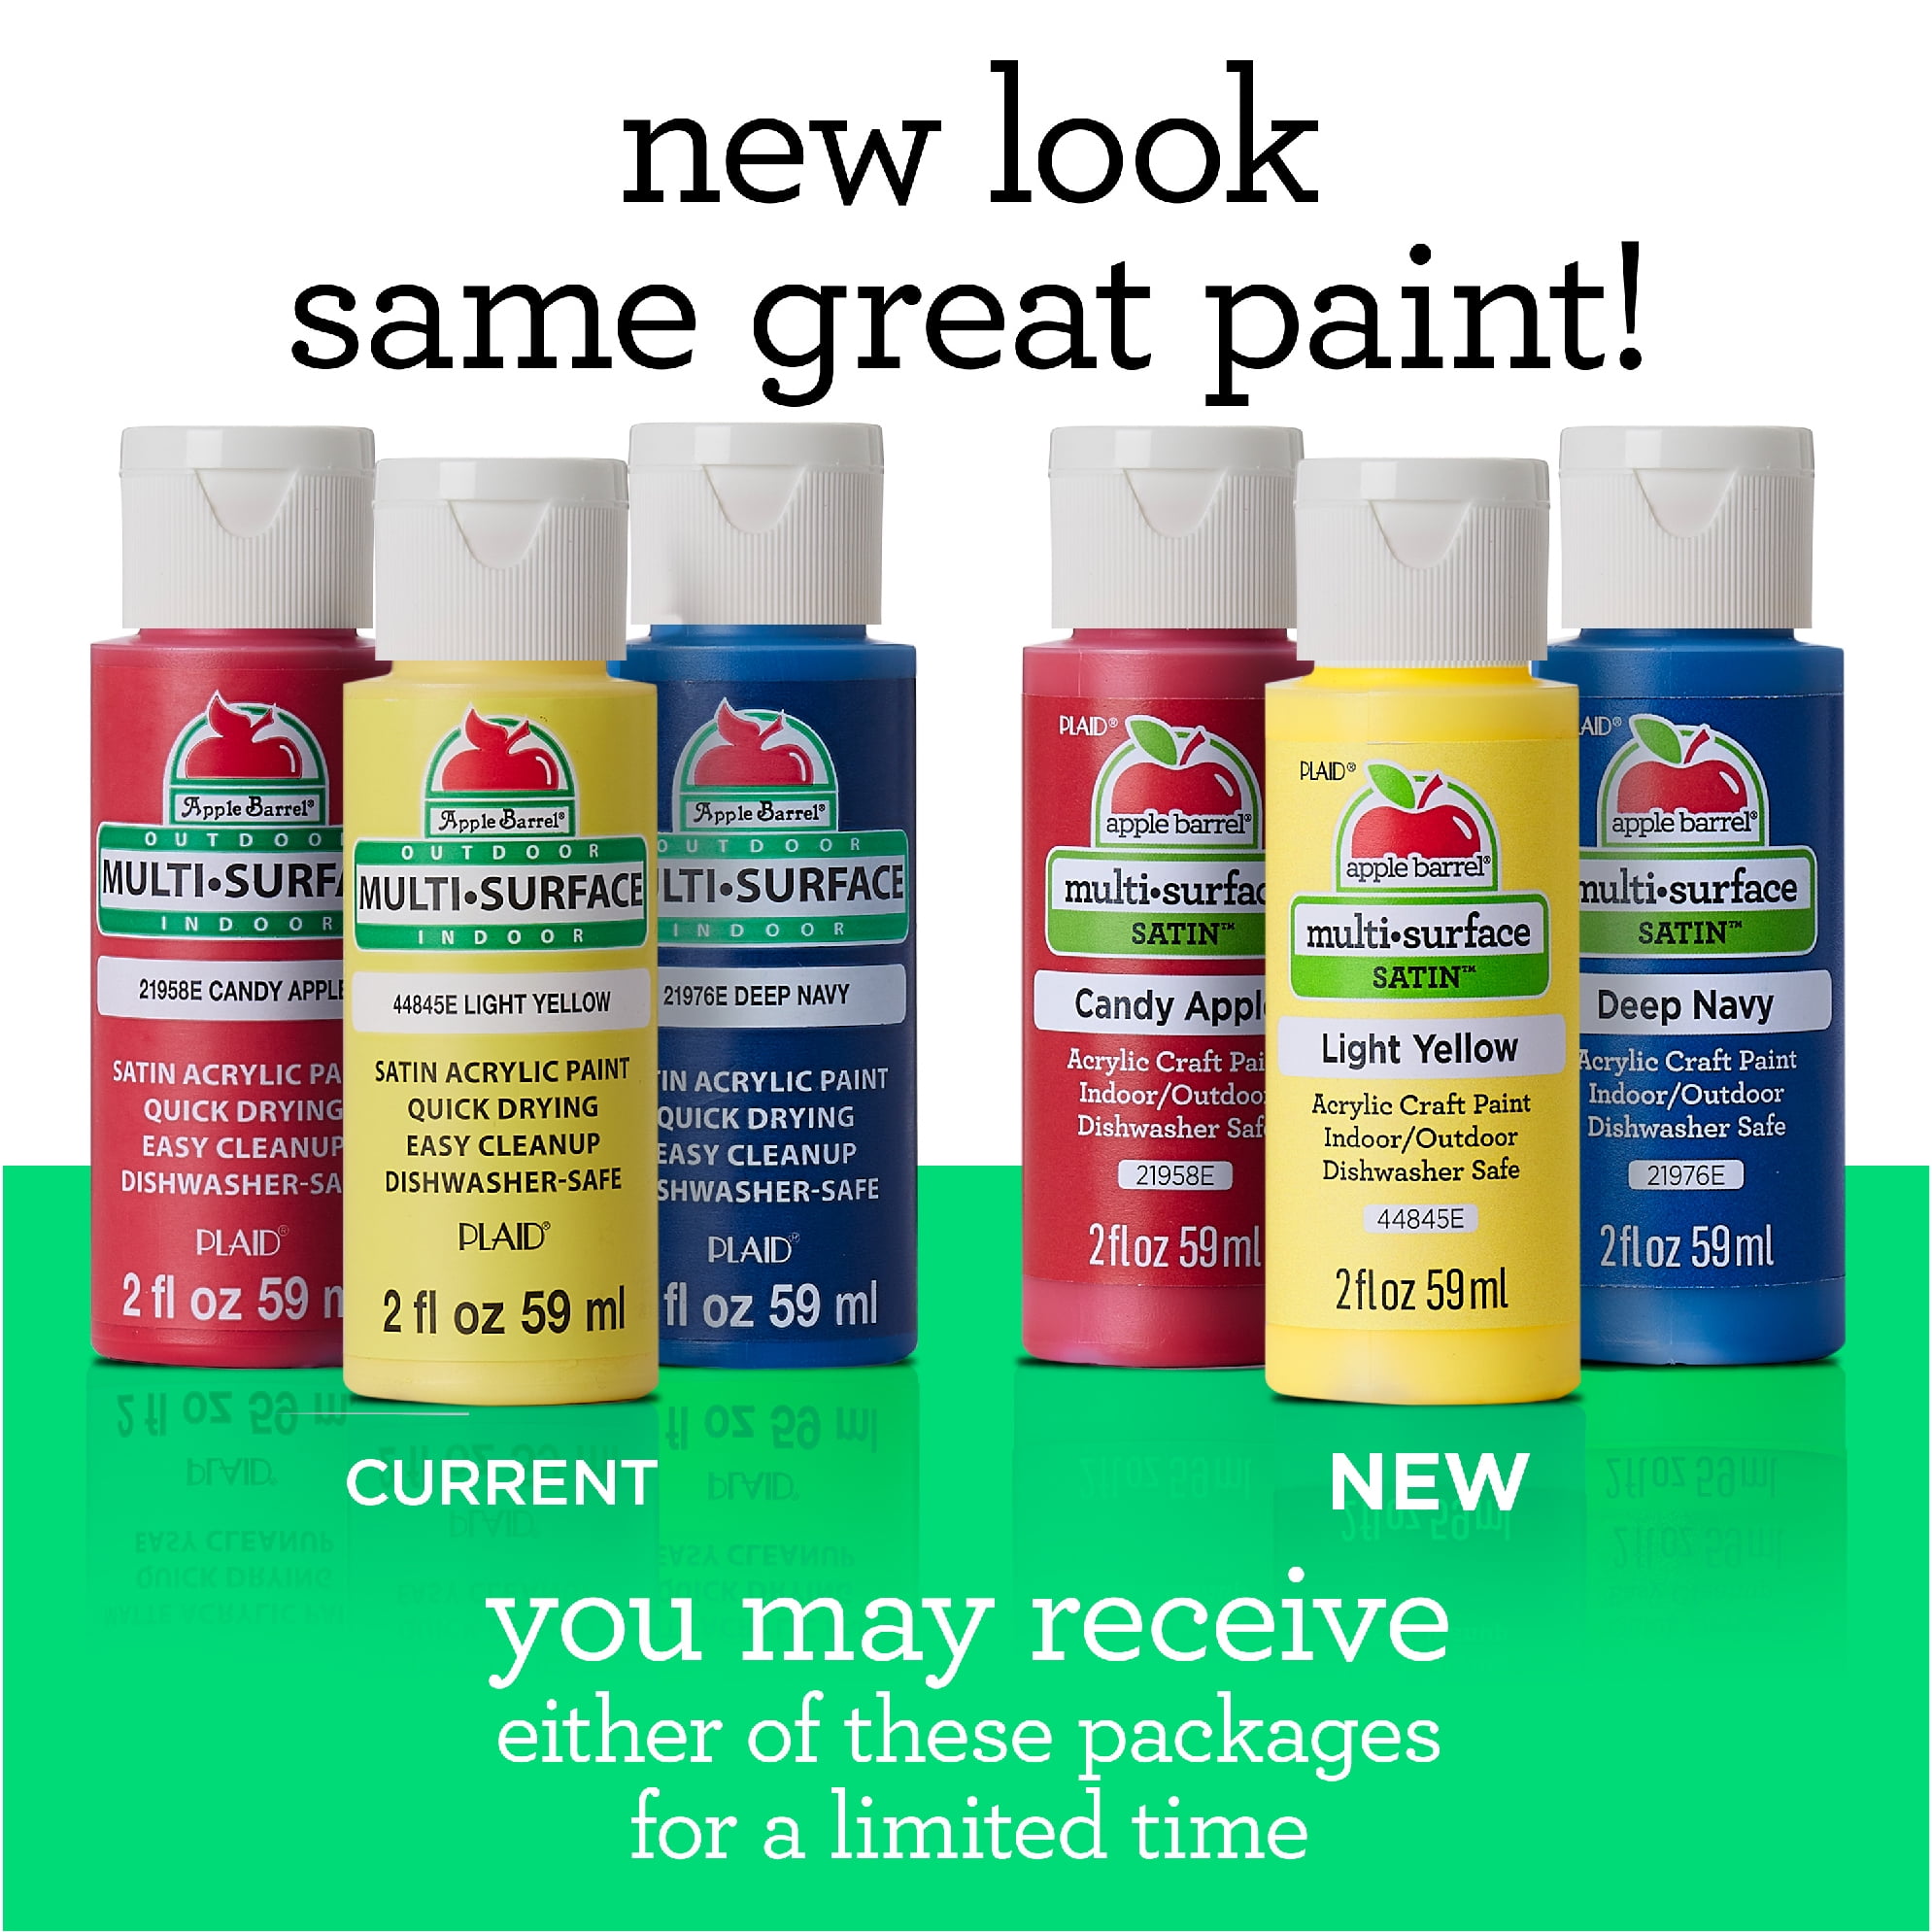  Apple Barrel Acrylic Paint in Assorted Colors (2 oz